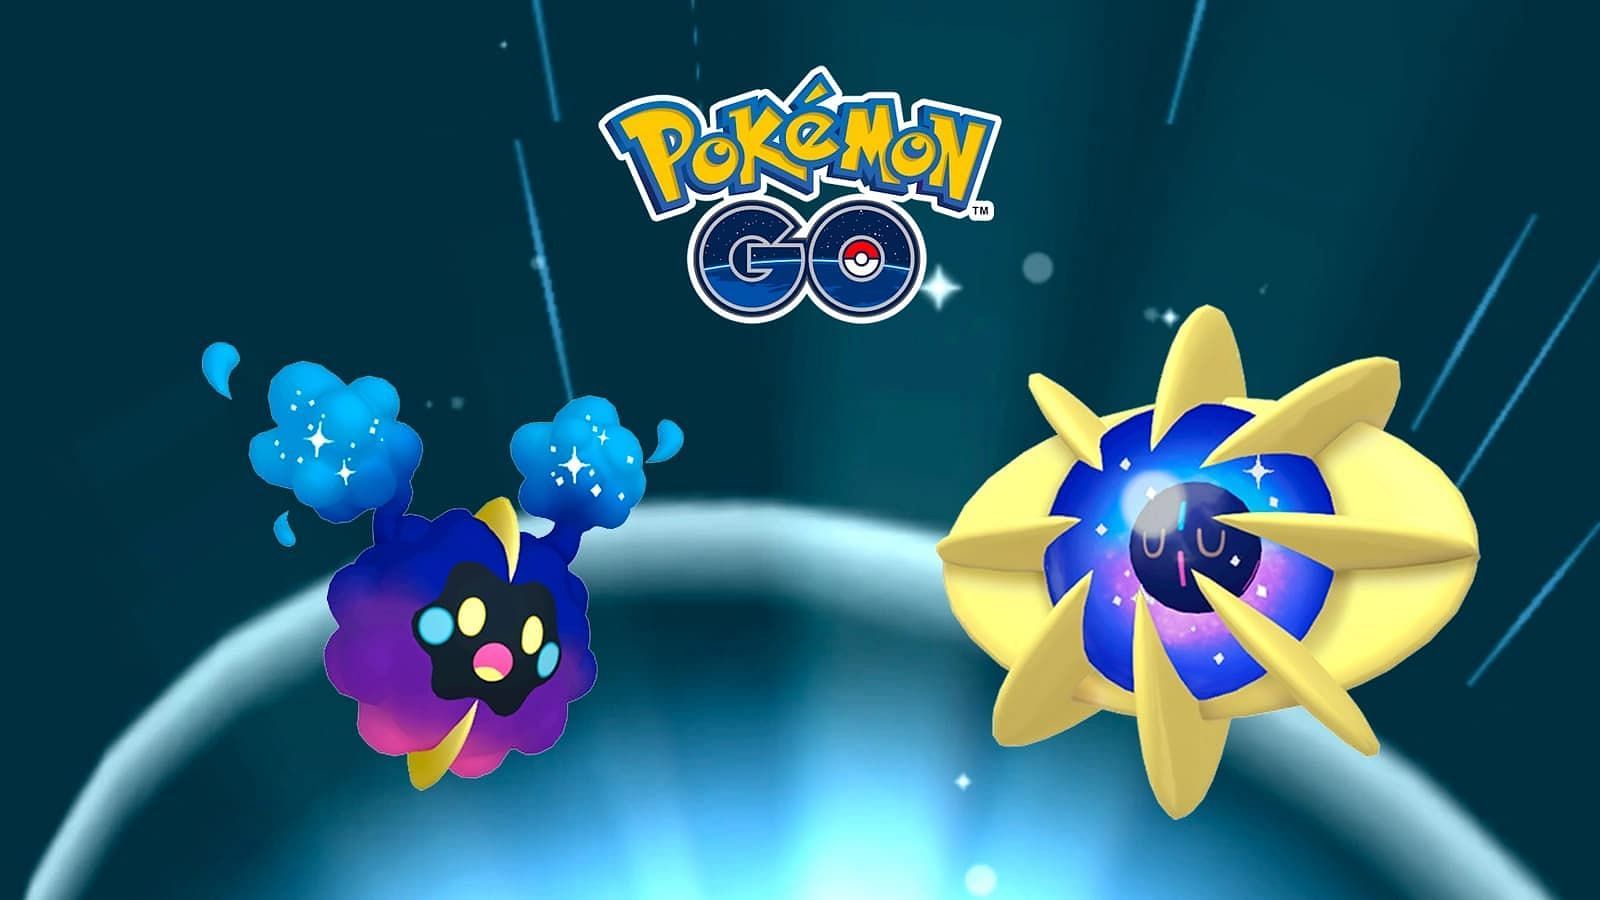 The Legendary Cosmog is the main focal part of the Evolving Stars event in Pokemon GO (Image via Niantic)